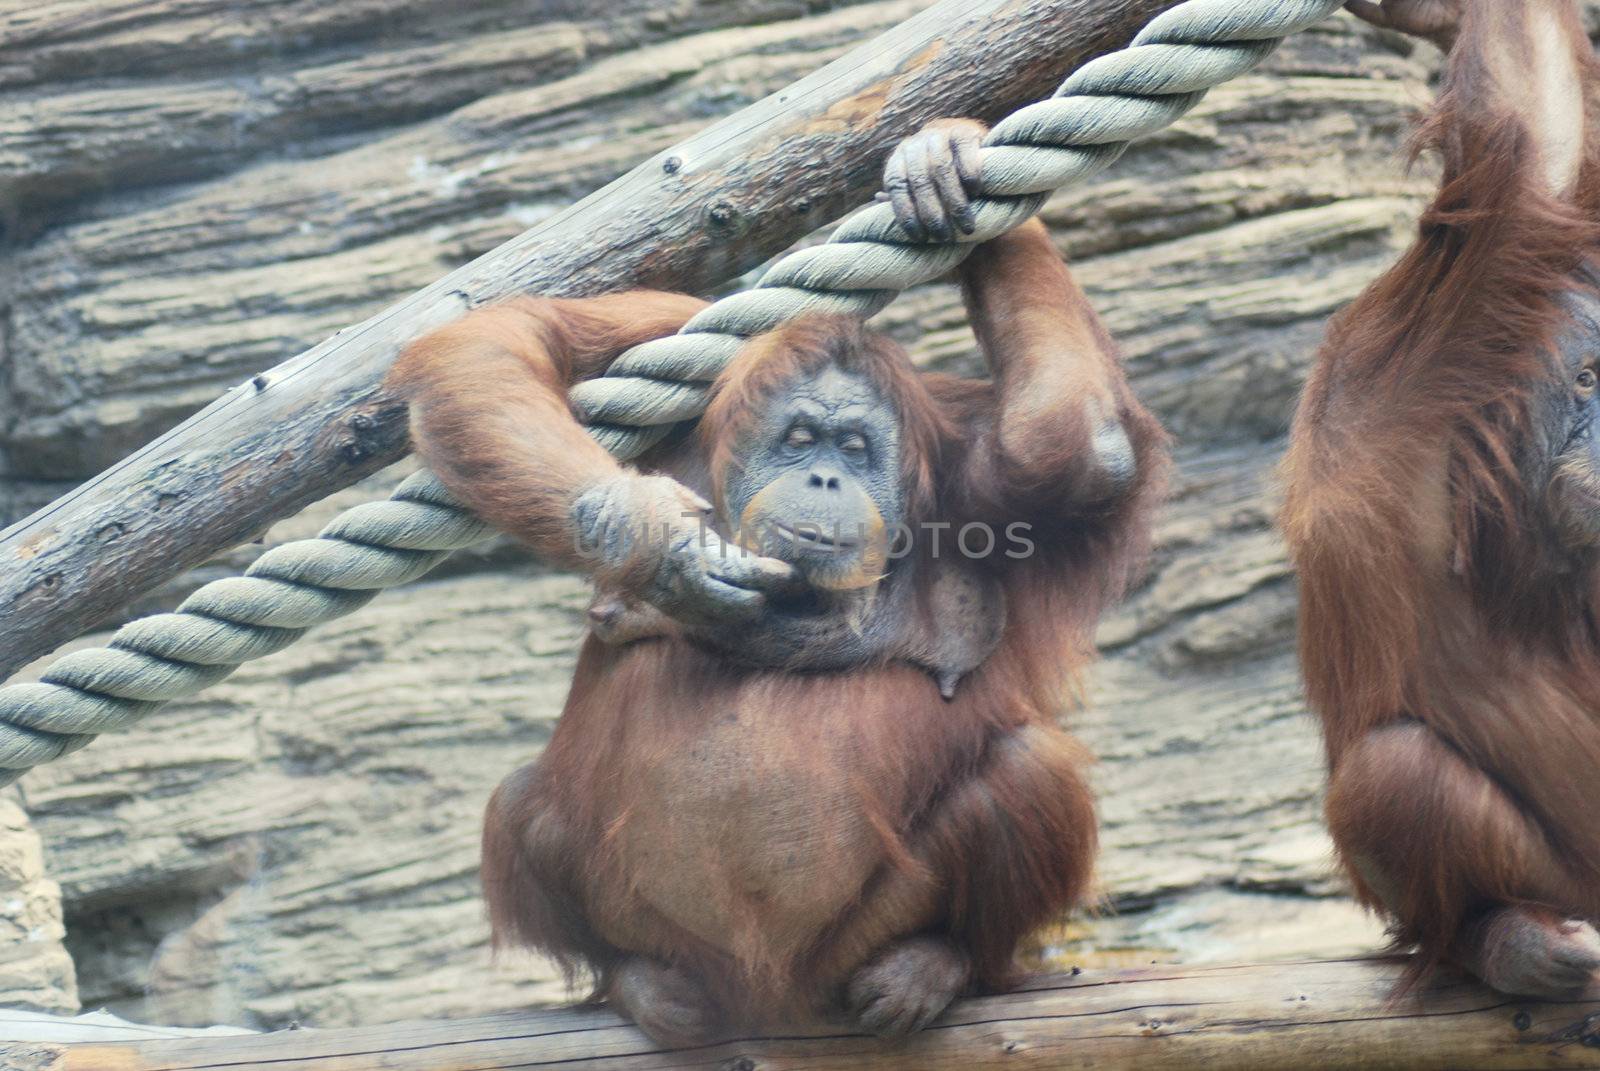 huge female orangutan  thinking and scratching her chin  by svtrotof